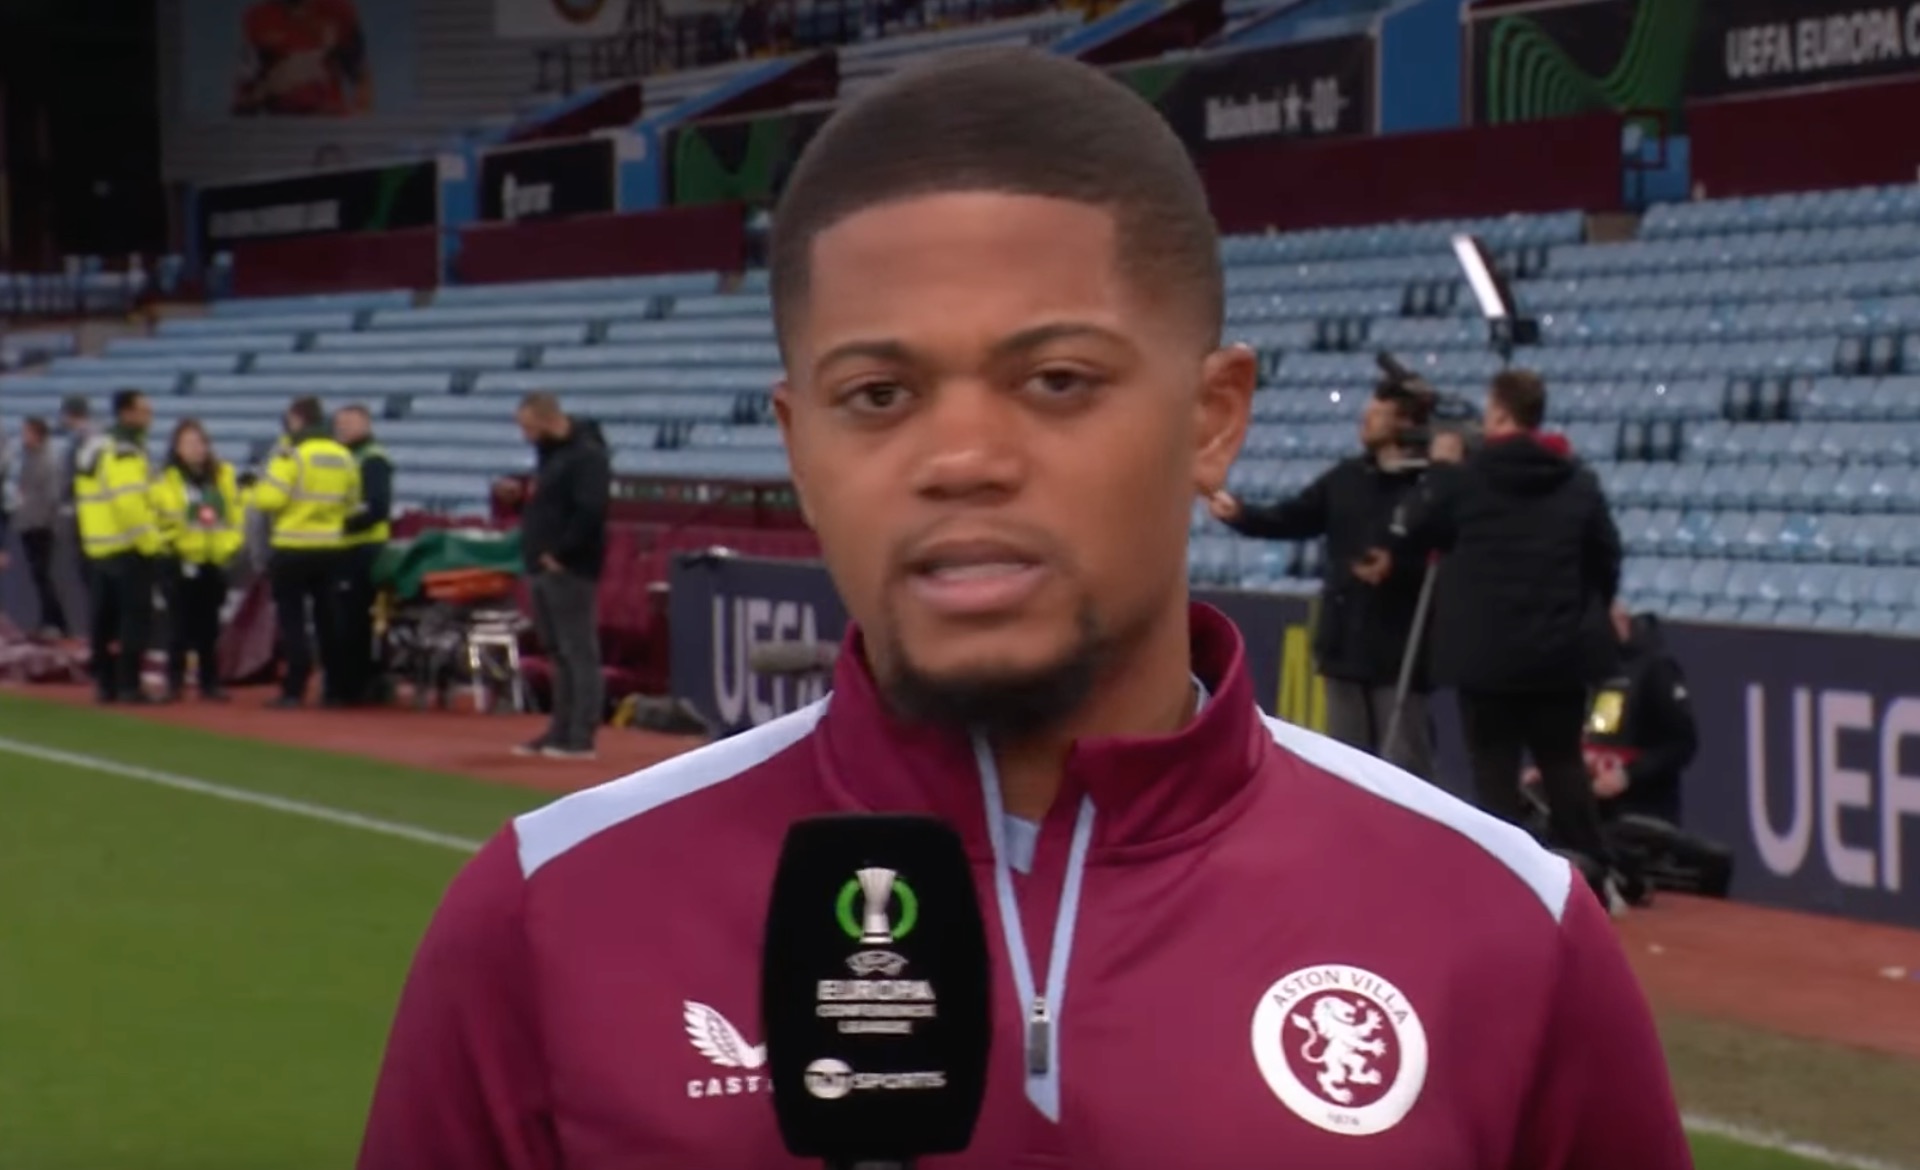 Bailey Scores 'Impressive Goal' for Aston Villa in 4-0 Victory Over Ajax - Watch Goal and Bailey's Post-Match Interview